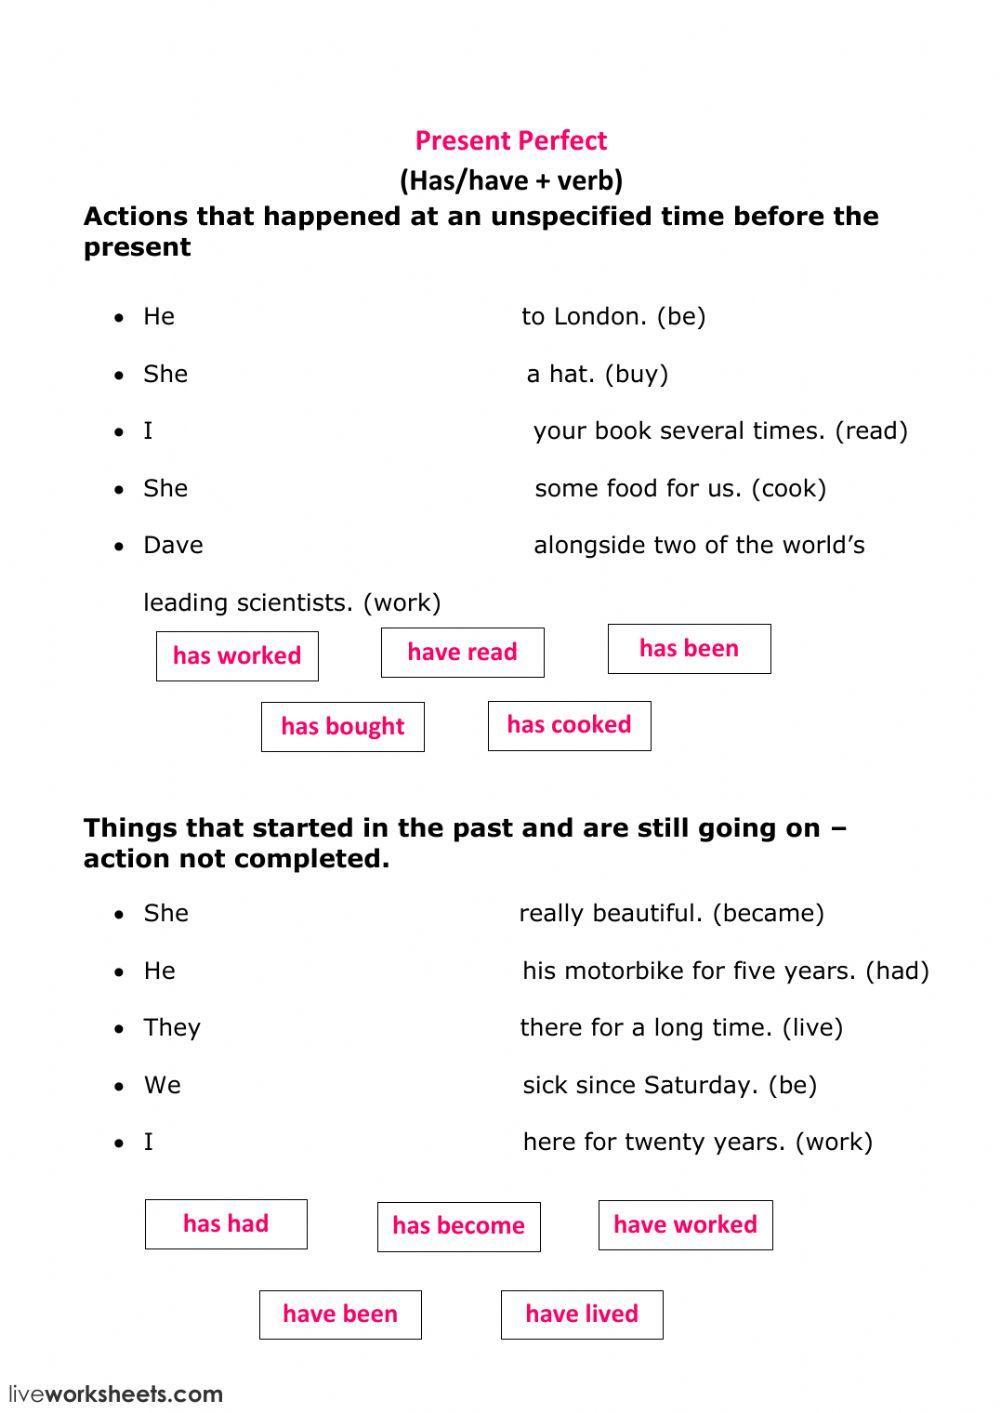 Present Perfect Tense Rules